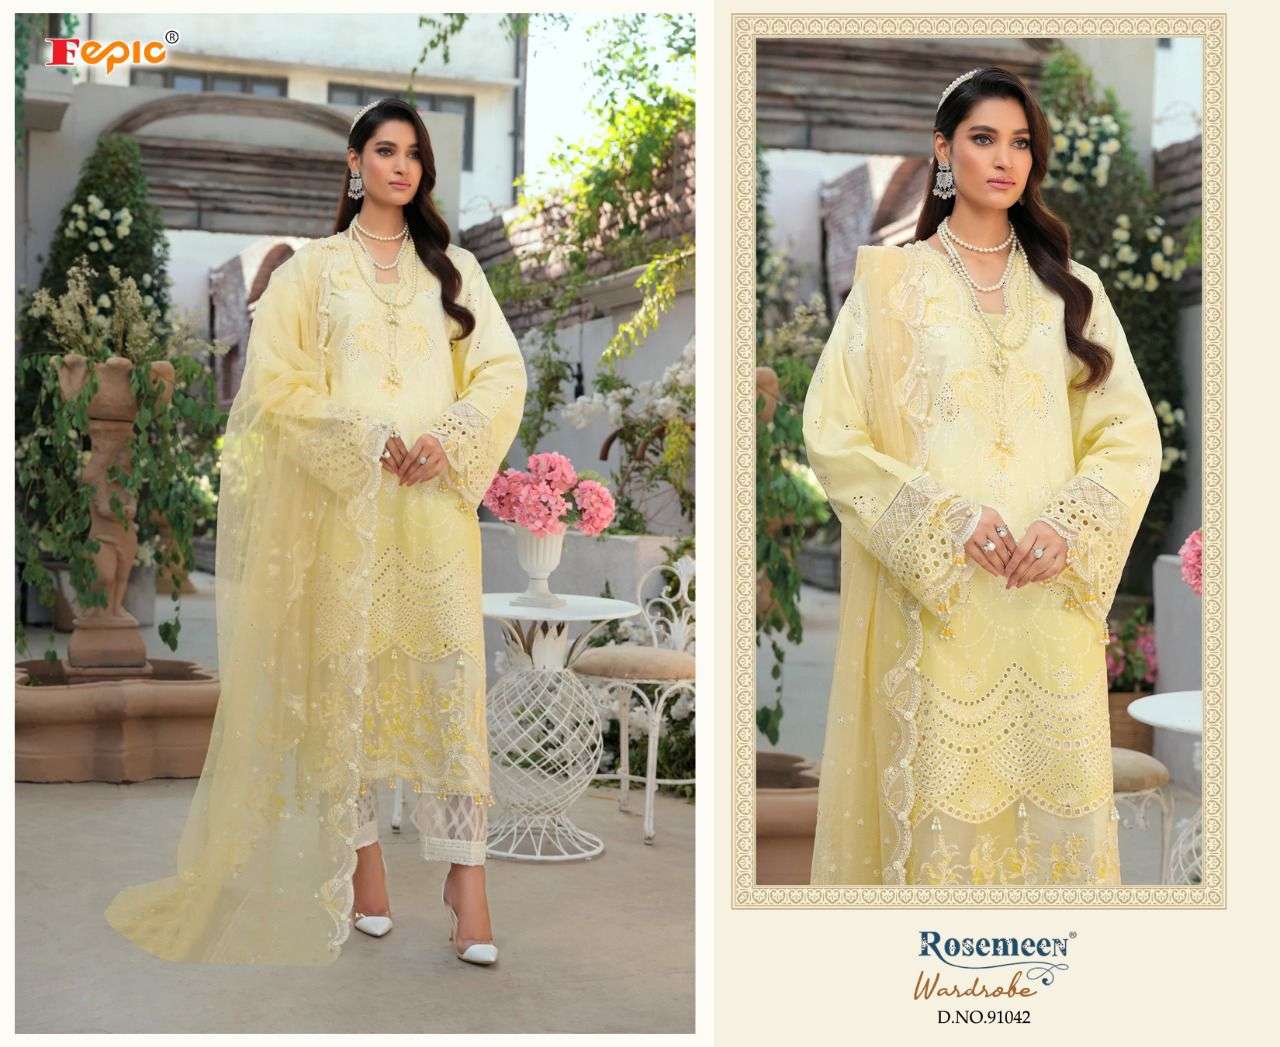 FEPIC ROSEMEEN WARDROBE DESIGNER FAUX GEORGETTE AND BUTTERFLY NET EMBROIDERED PARTY WEAR SUITS IN WHOLESALE RATE 